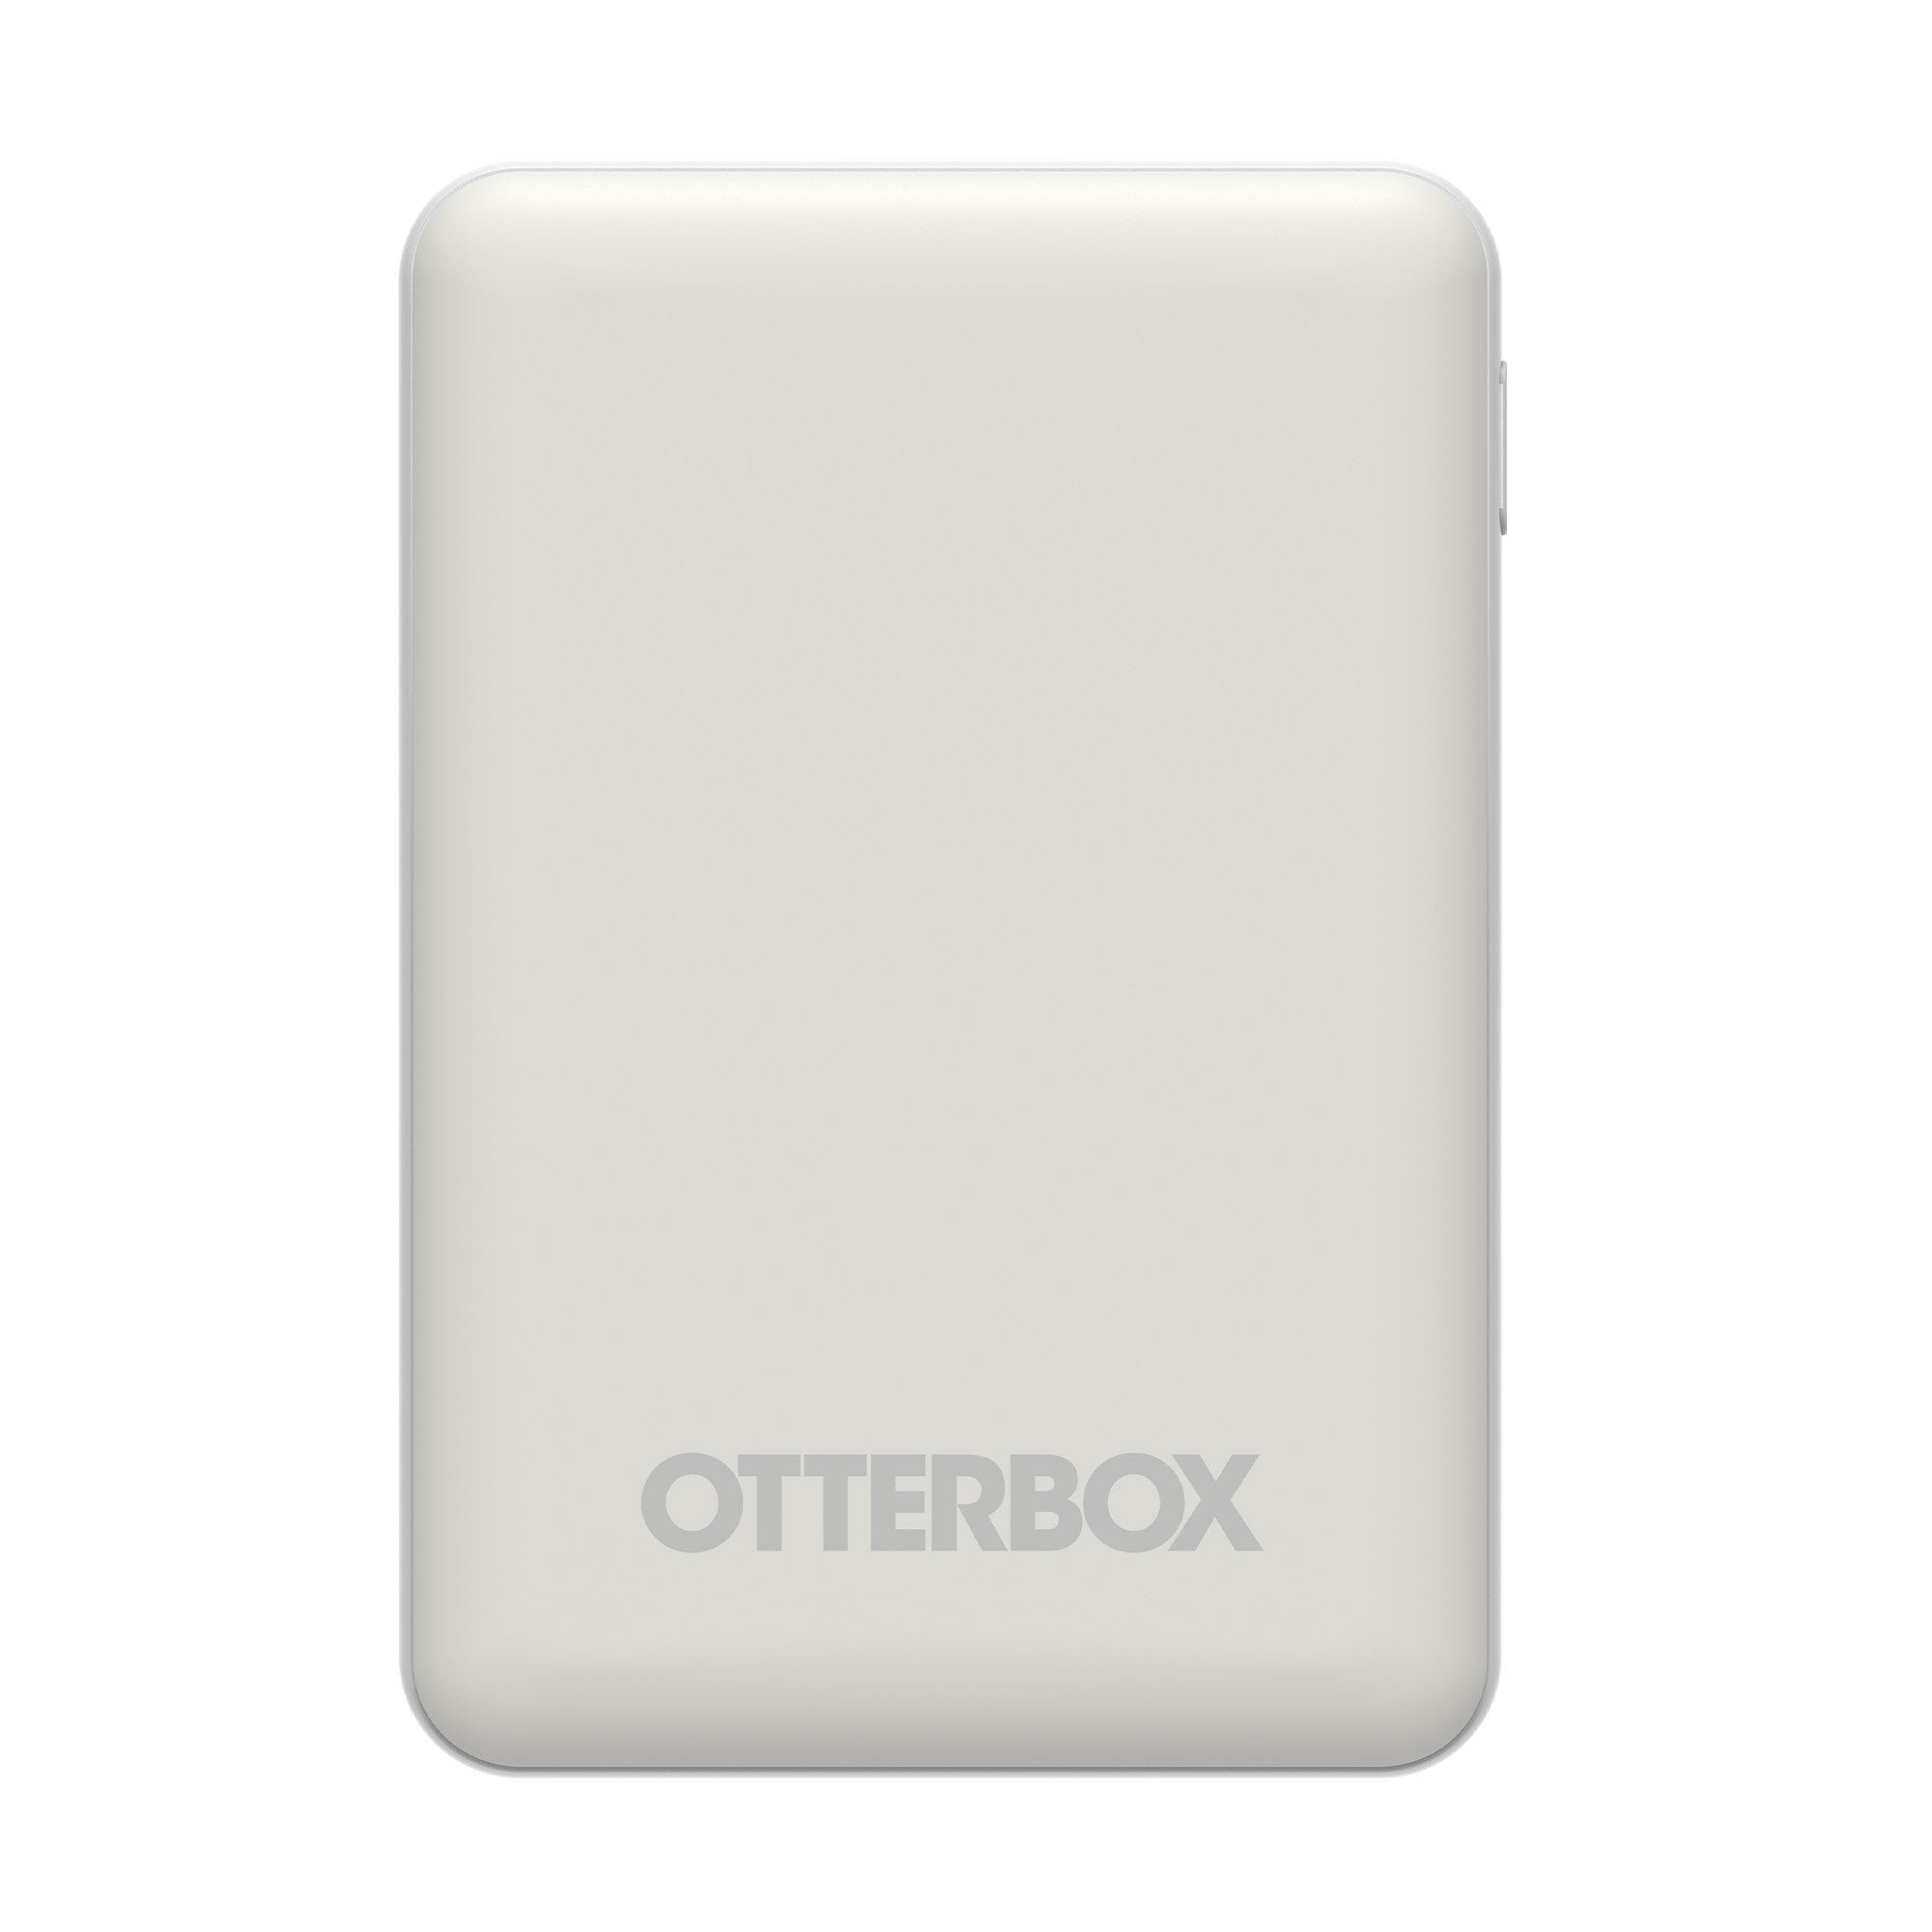 Otterbox 5,000 mAh 3-in-1 Portable Power Bank Mobile Charging Kit - White - 15-12040